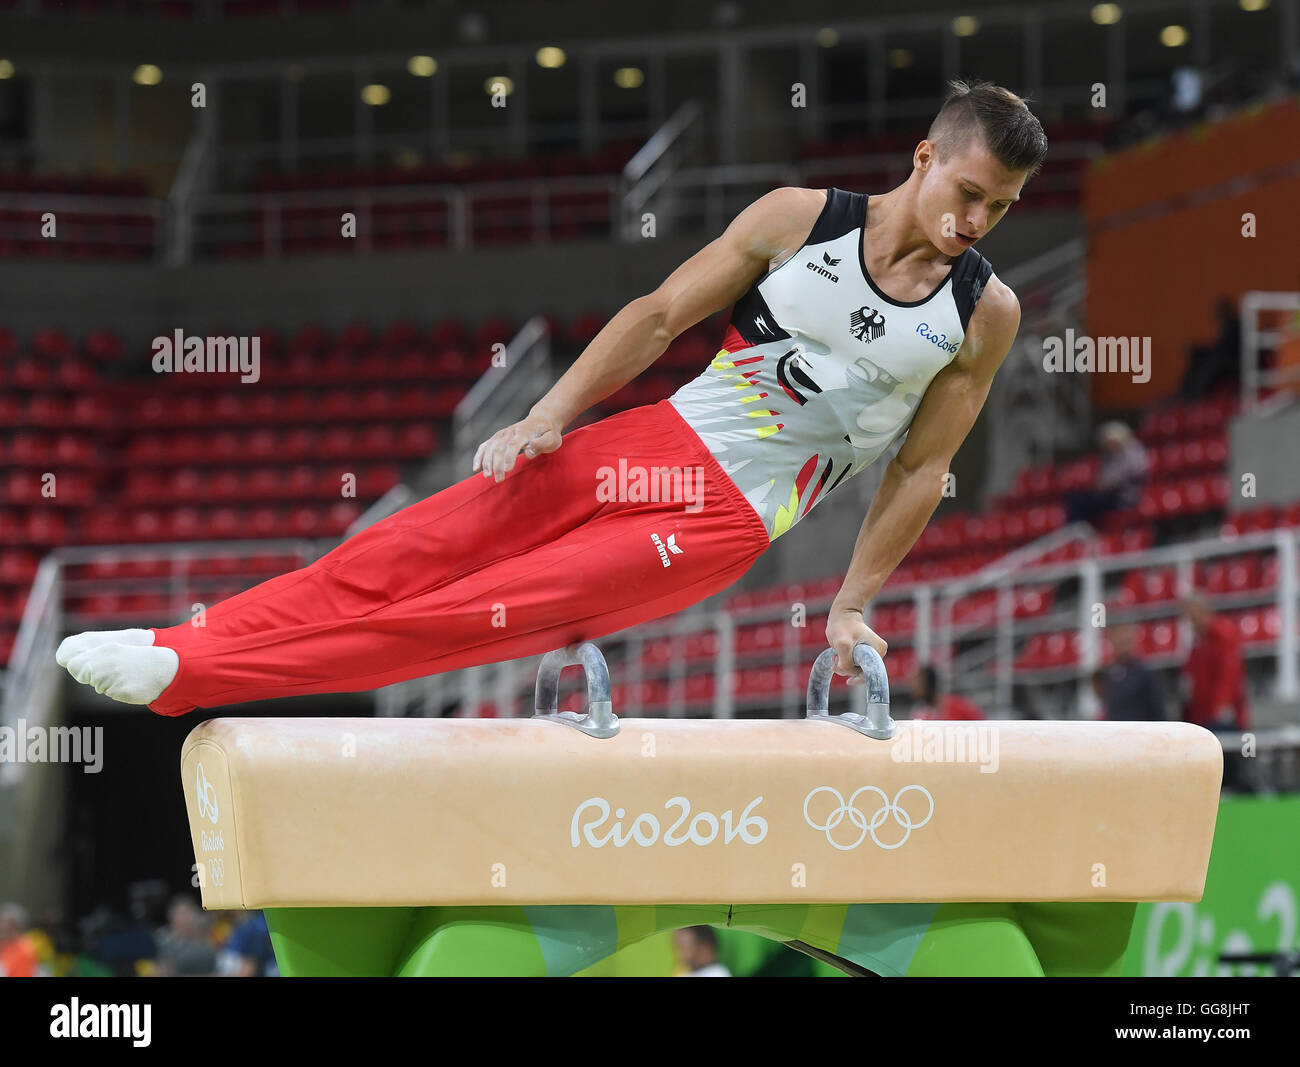 Rio de Janeiro, Brazil. 3rd Aug, 2016. Lukas Dauser of Germany in action during a training session of the mens' Artistic Gymnastics on pommel horse at Olympic Arena in Barra prior to the Rio 2016 Olympic Games in Rio de Janeiro, Brazil, 3 August 2016. Rio 2016 Olympic Games take place from 05 to 21 August. Photo: Bernd Thissen/dpa/Alamy Live News Stock Photo